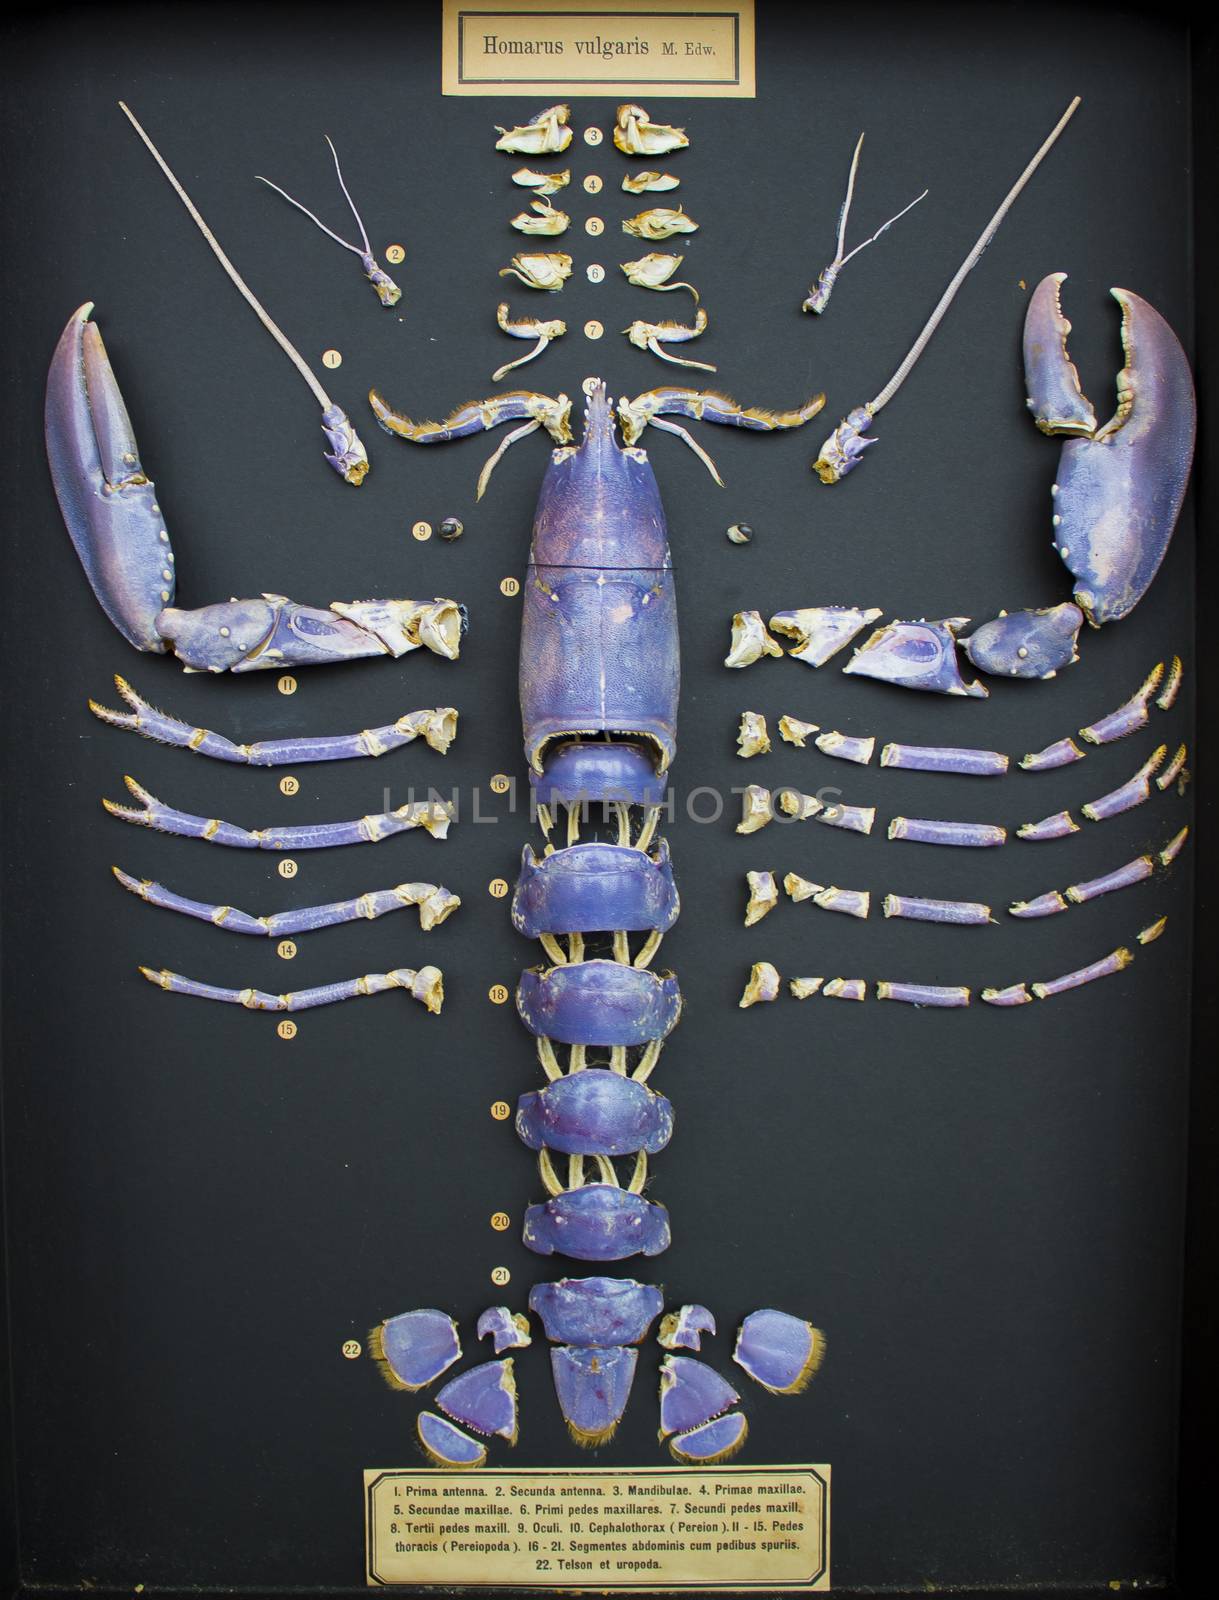 A north sea lobster shell segmented into pieces and displayed in a case